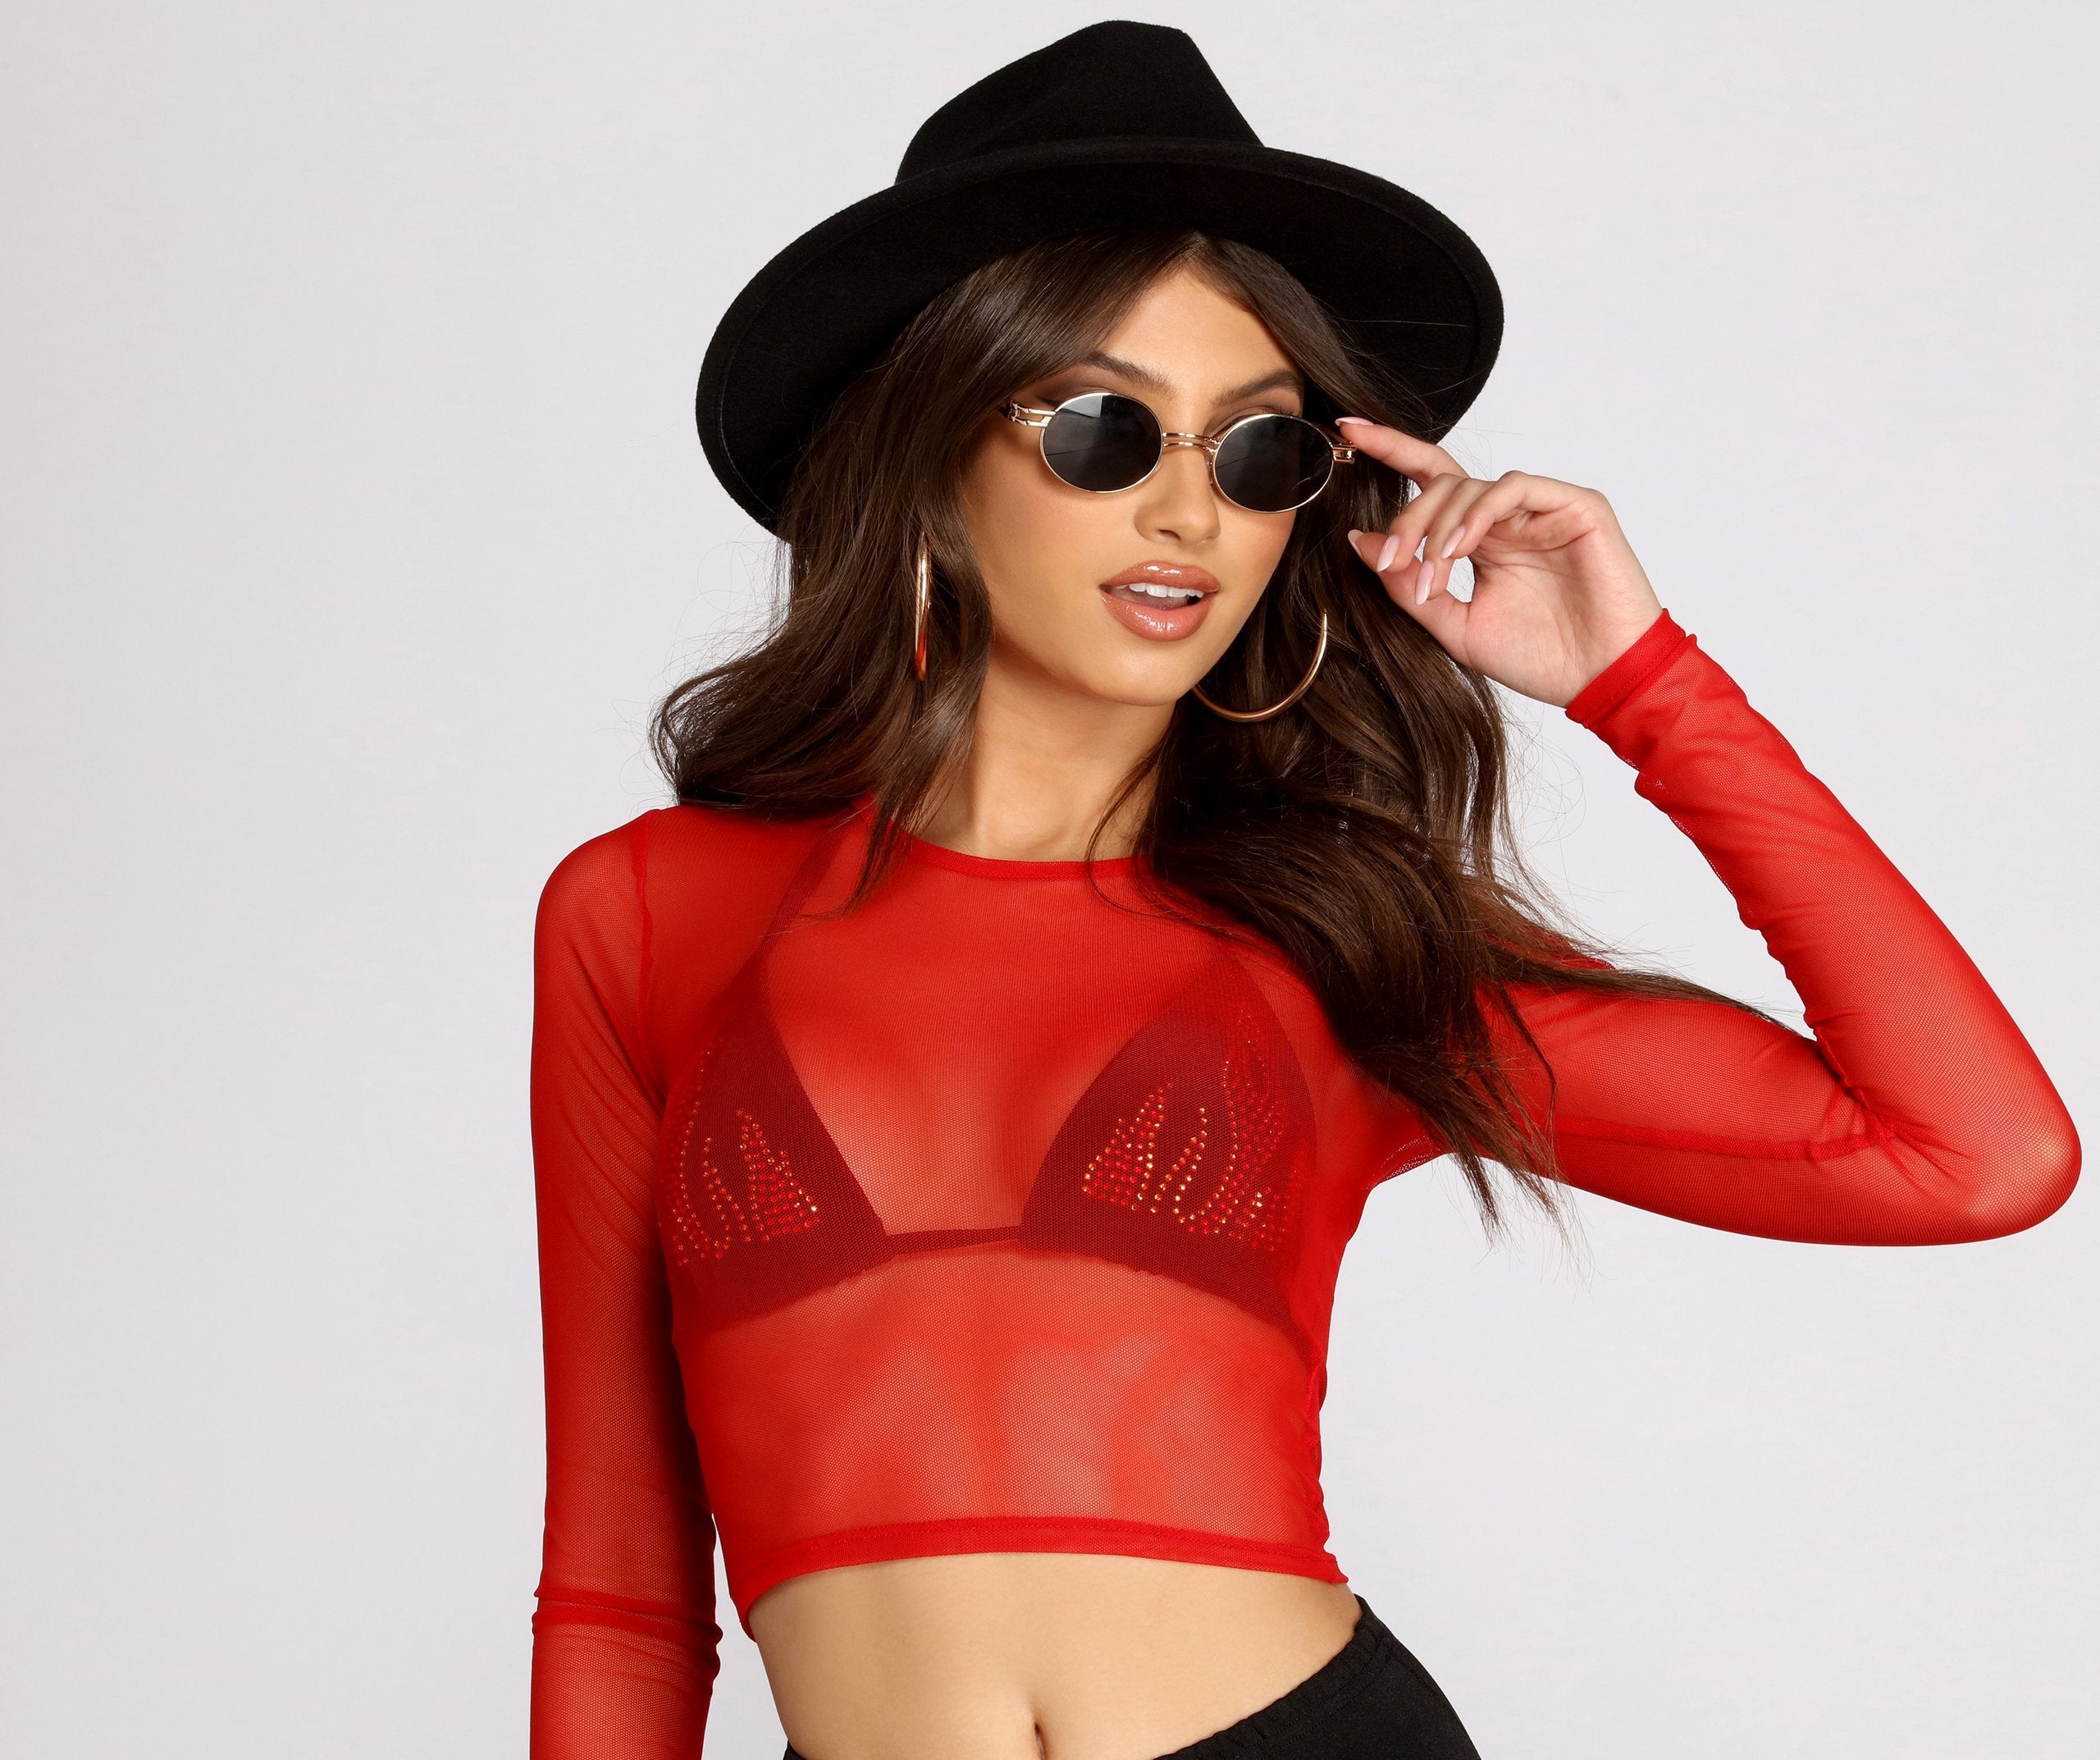 In A Mesh Mood Crop Top - Lady Occasions